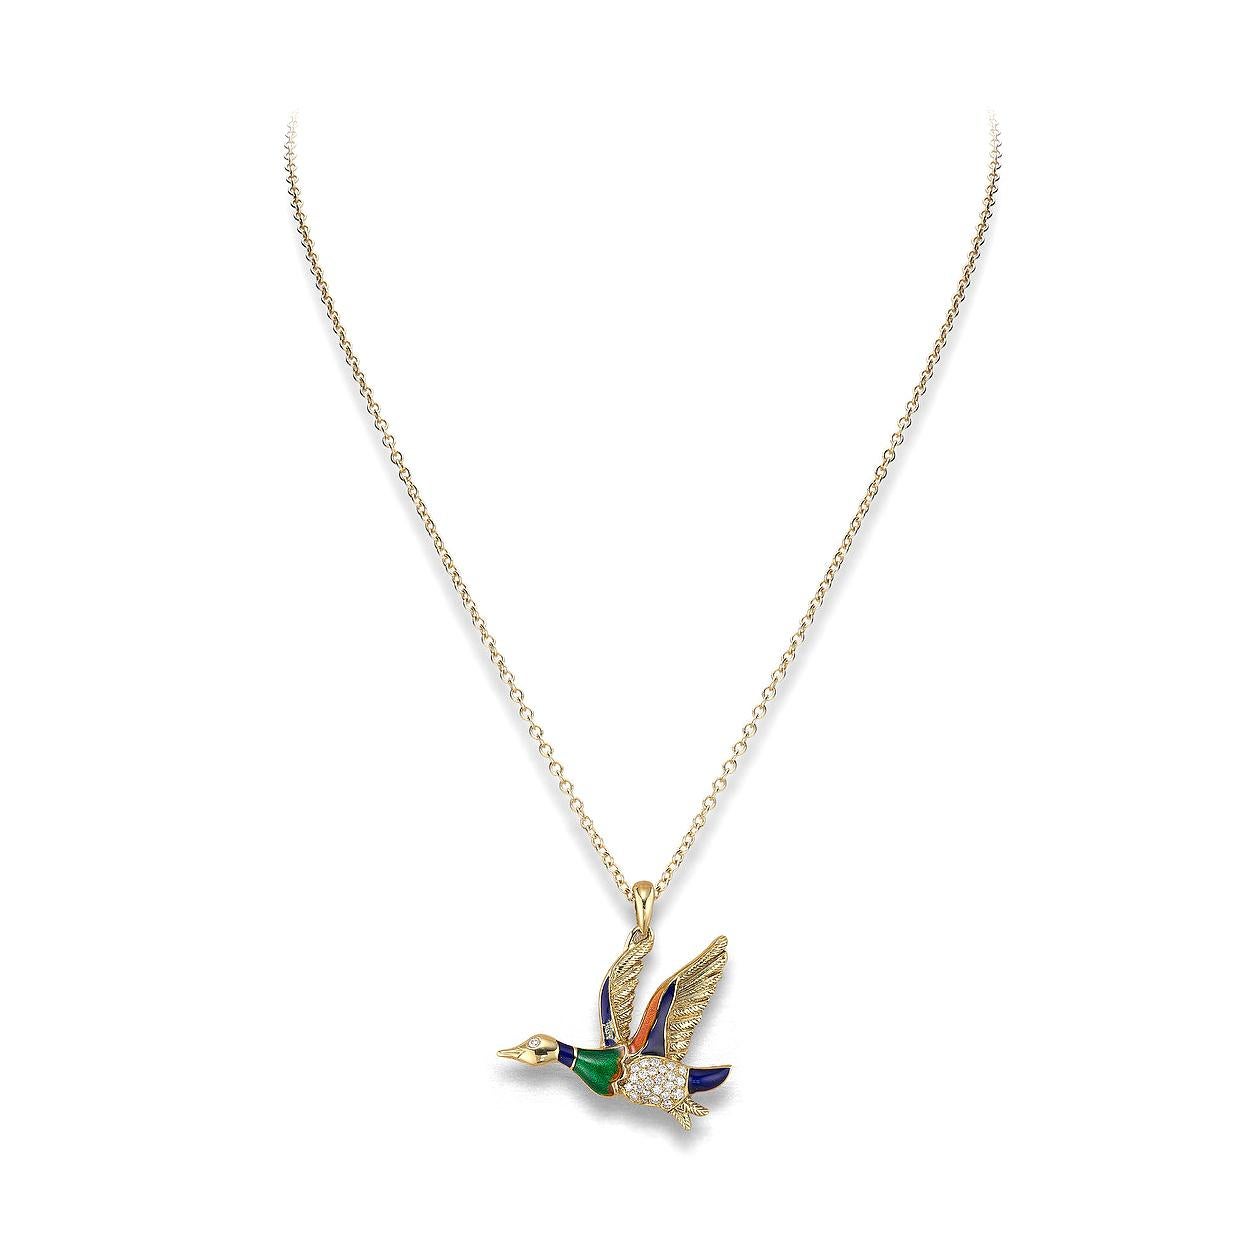 Bird pendant in 18kt yellow gold set with diamonds and enamel